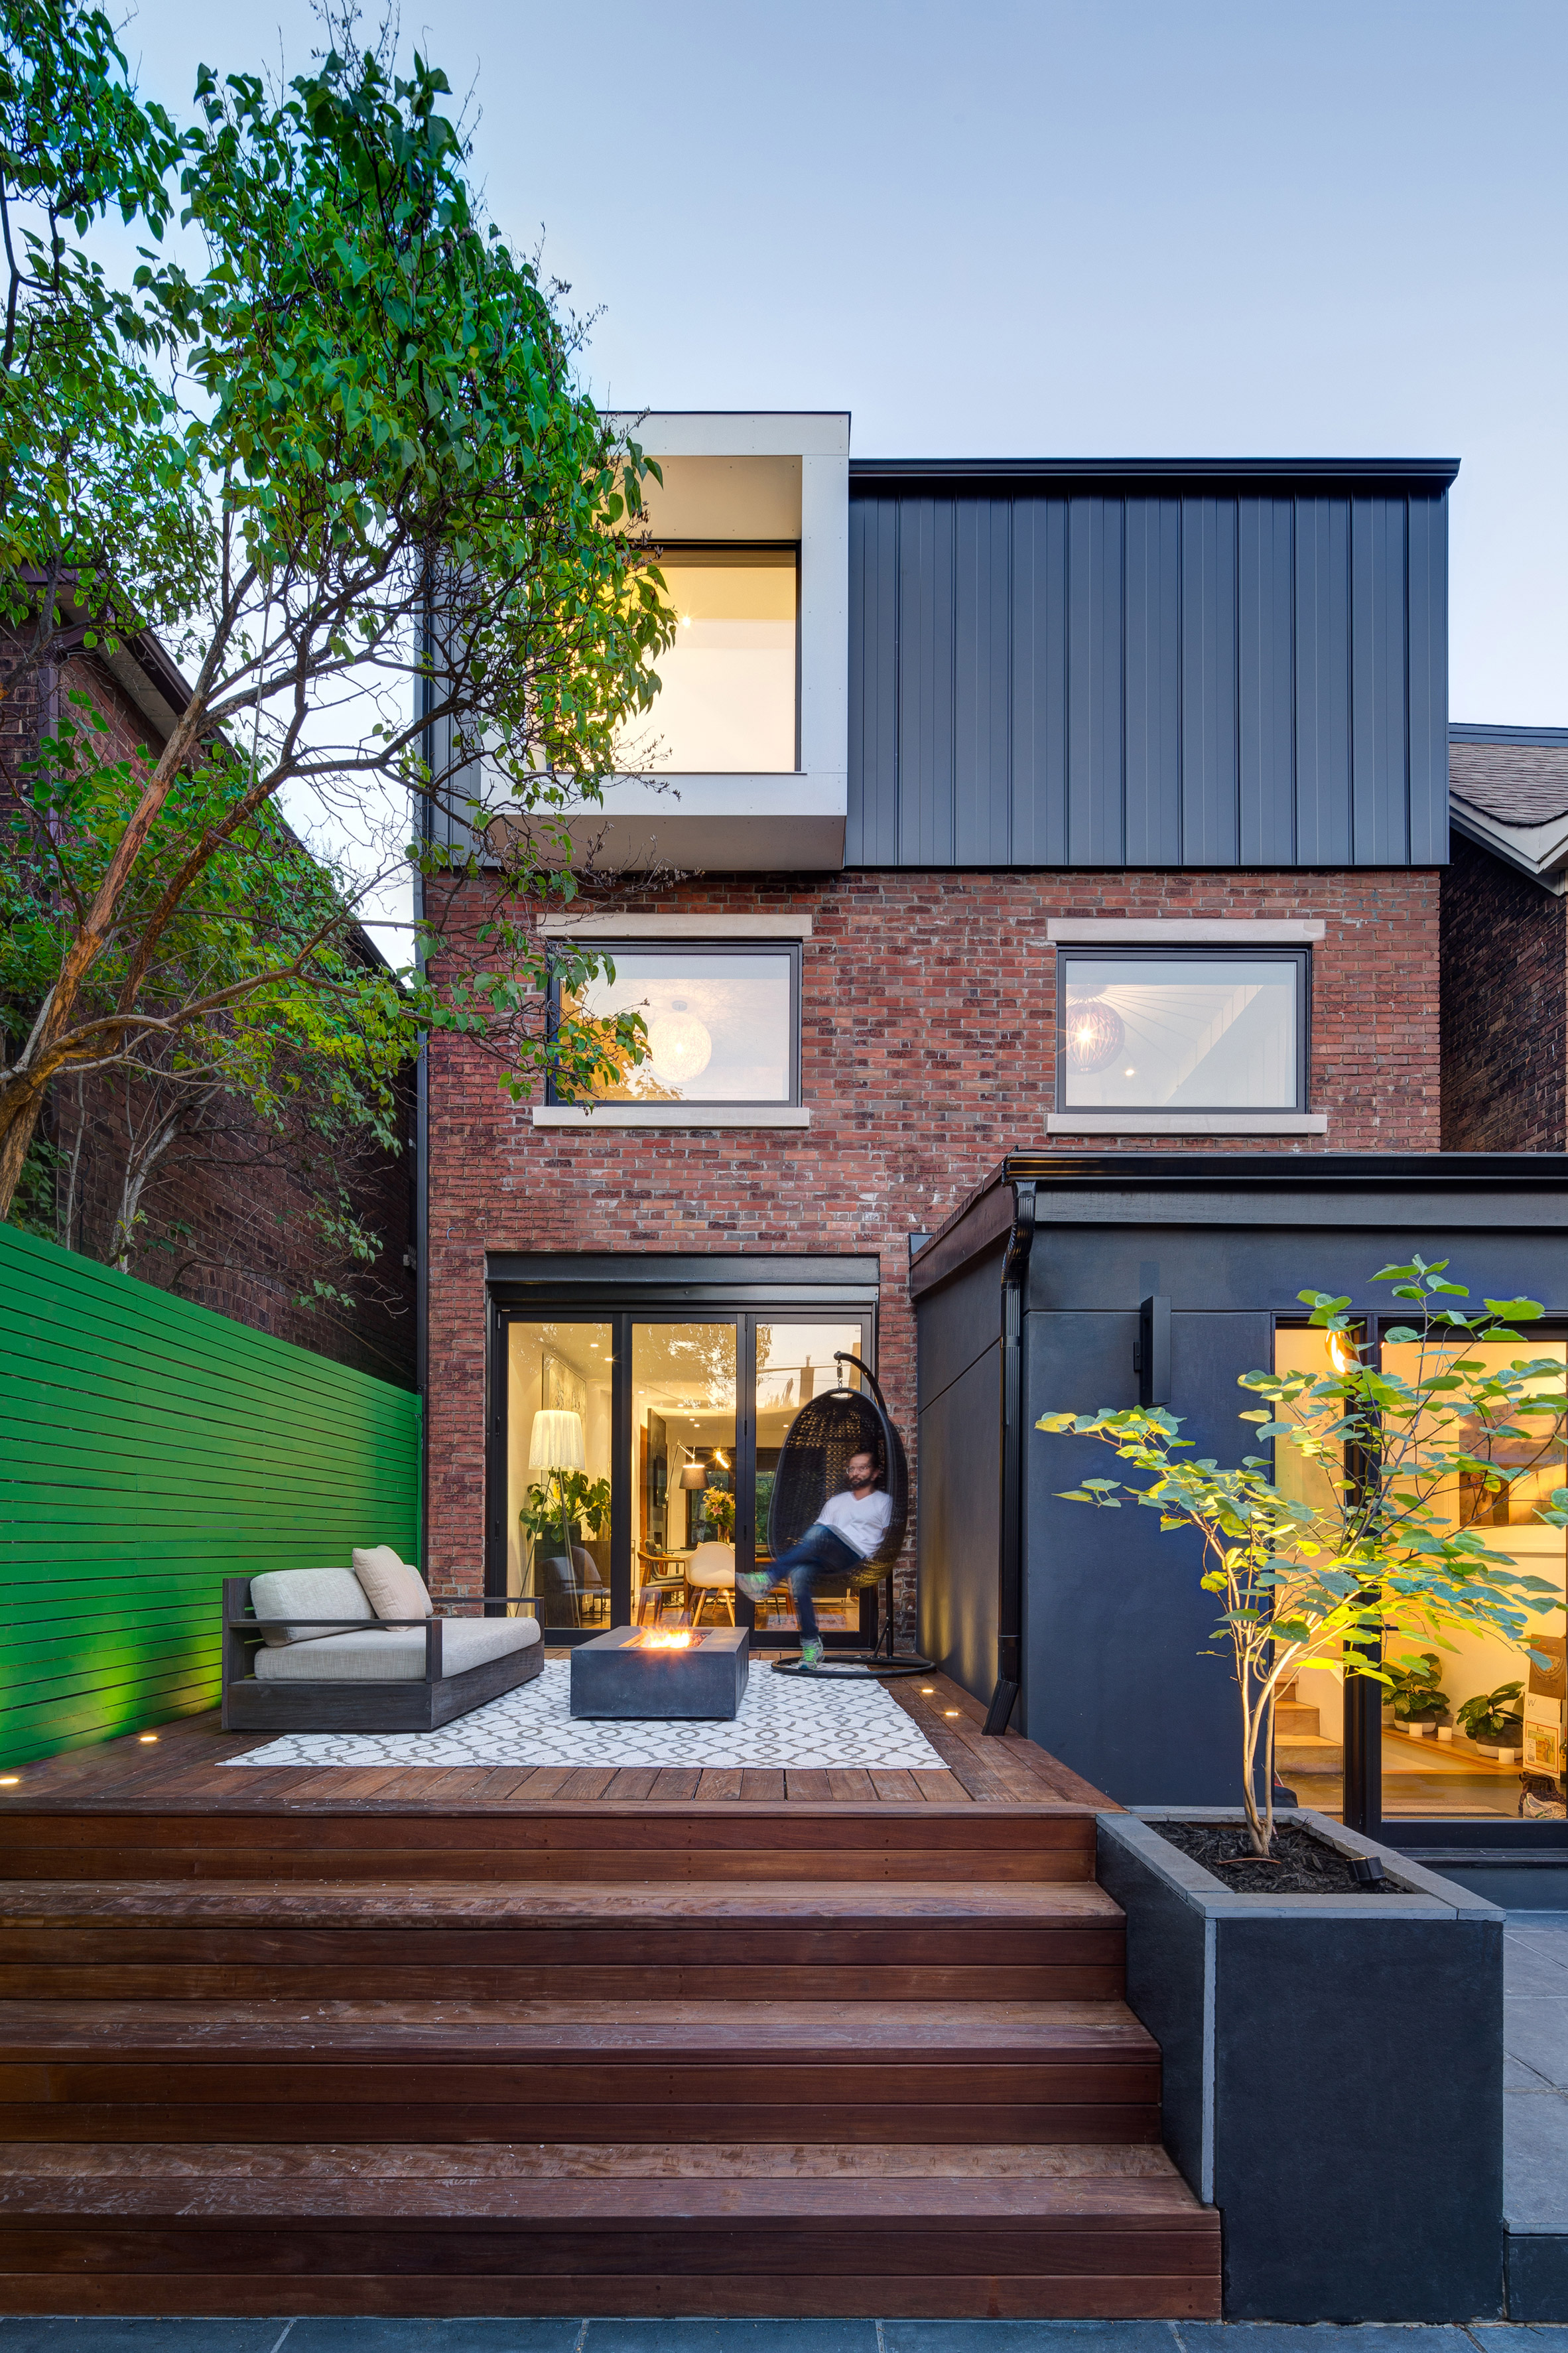 Riverdale Dormer by Post Architecture